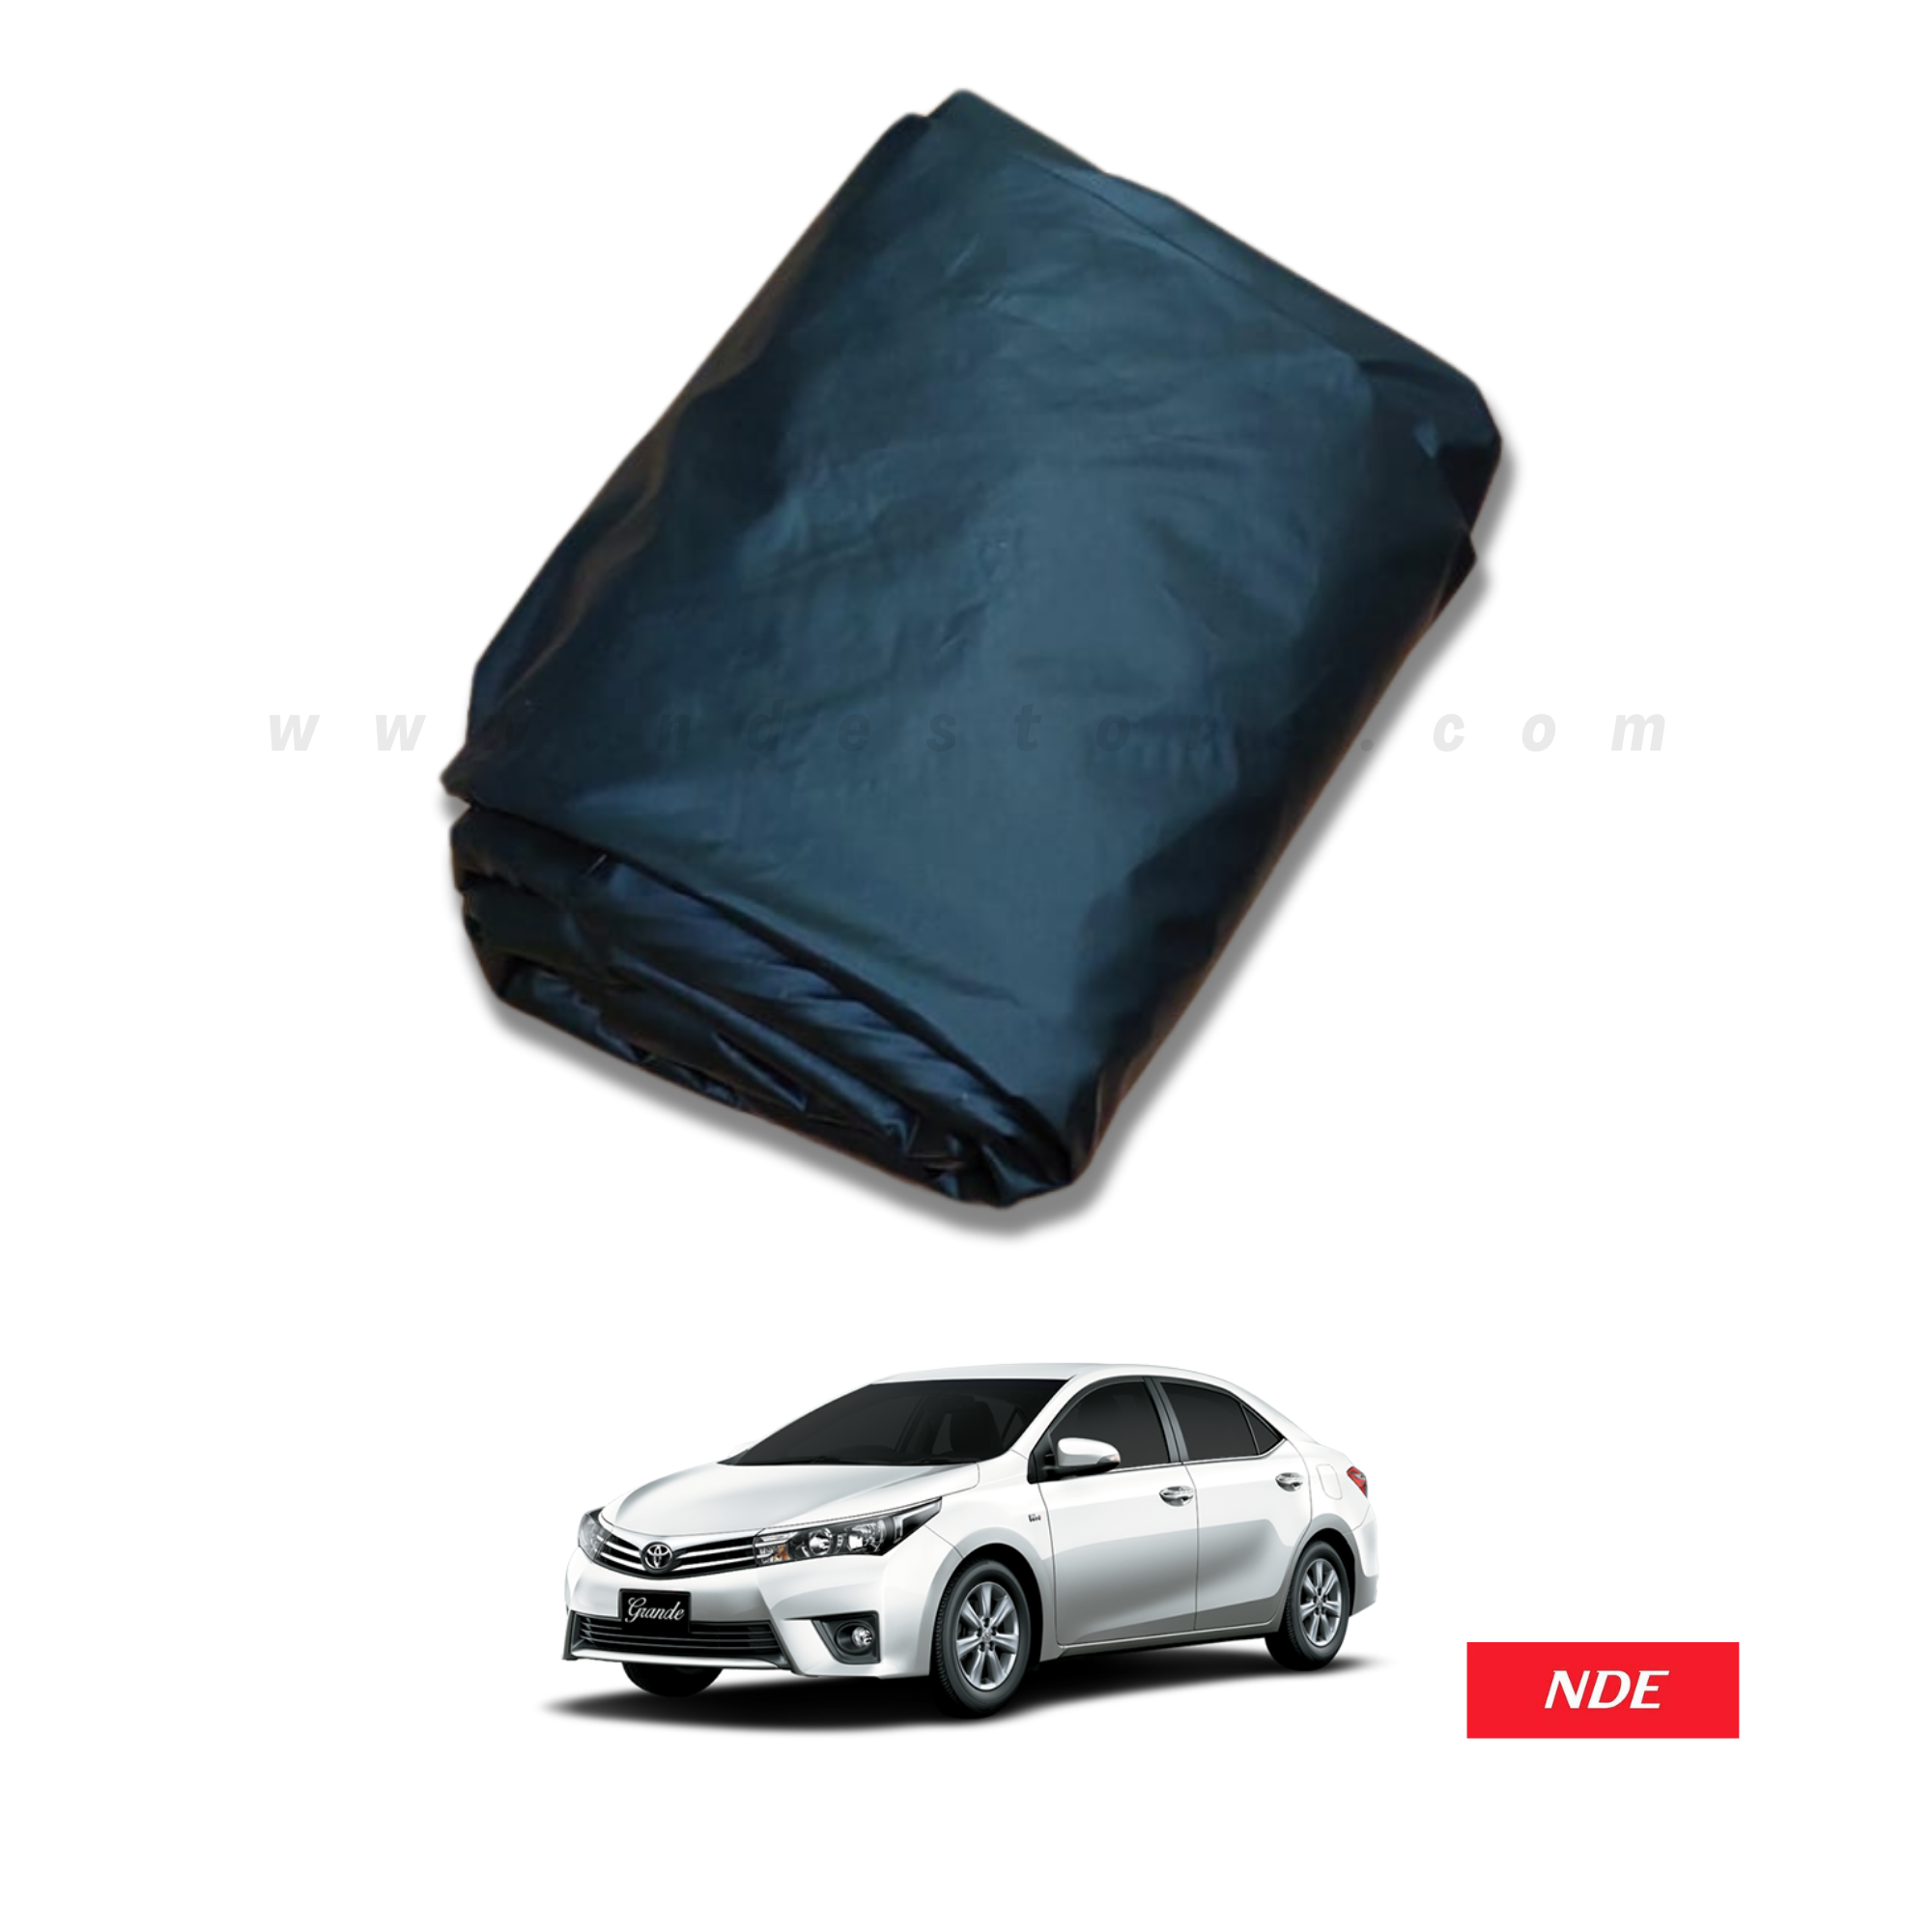 TOP COVER FOR TOYOTA COROLLA (ALL MODELS)